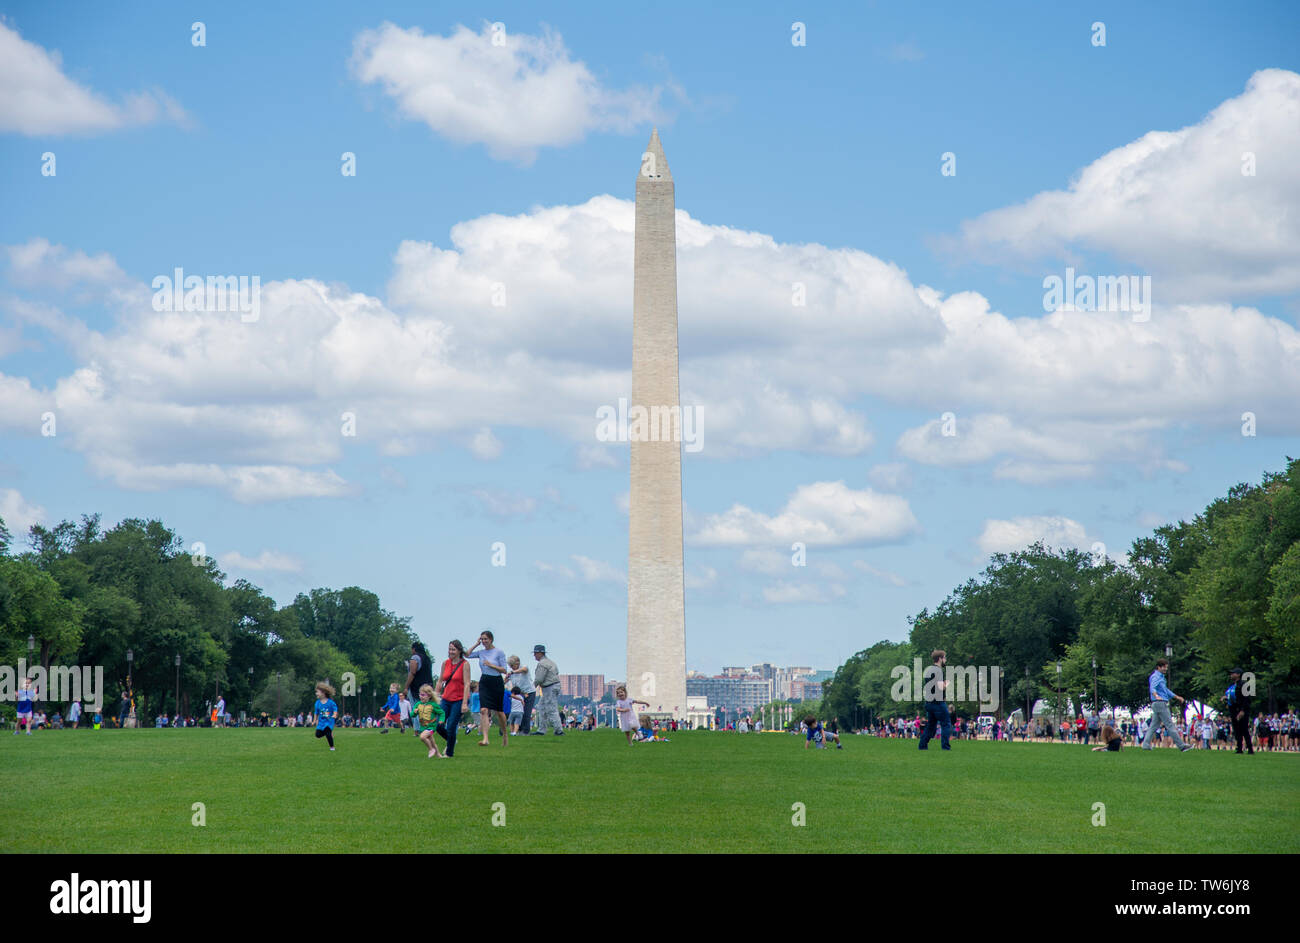 Visitors enjoy the lush grass and blue skies at the National Mall - America's Front Lawn - in Washington DC. Stock Photo